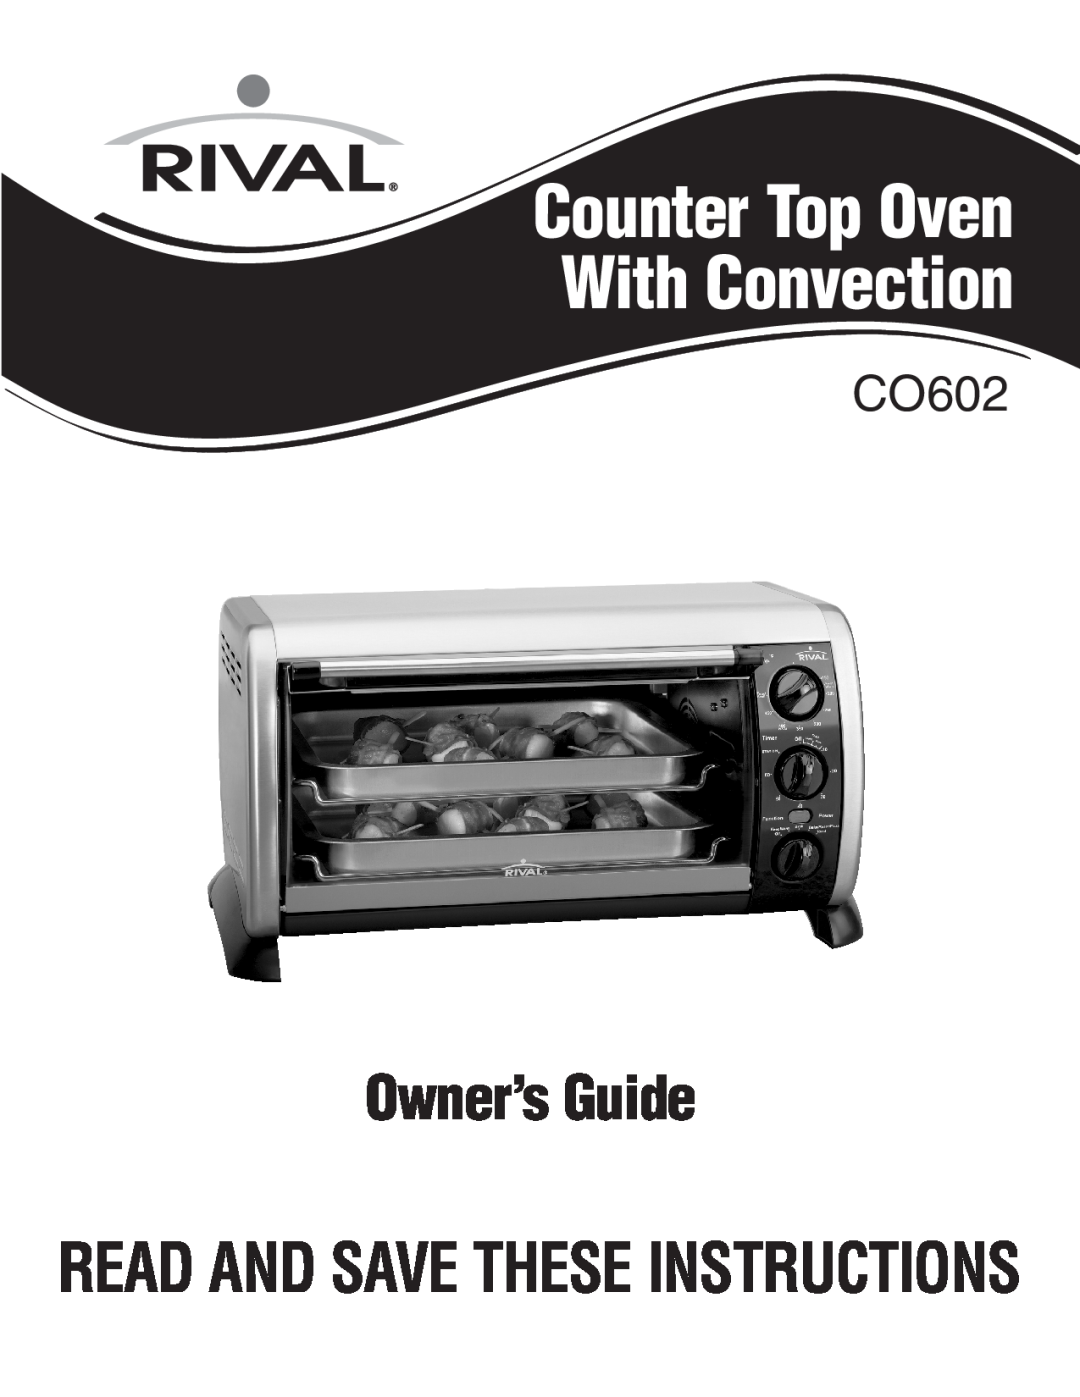 Rival CO602 manual Counter Top Oven With Convection, Owner’sGuide, Read And Save These Instructions 